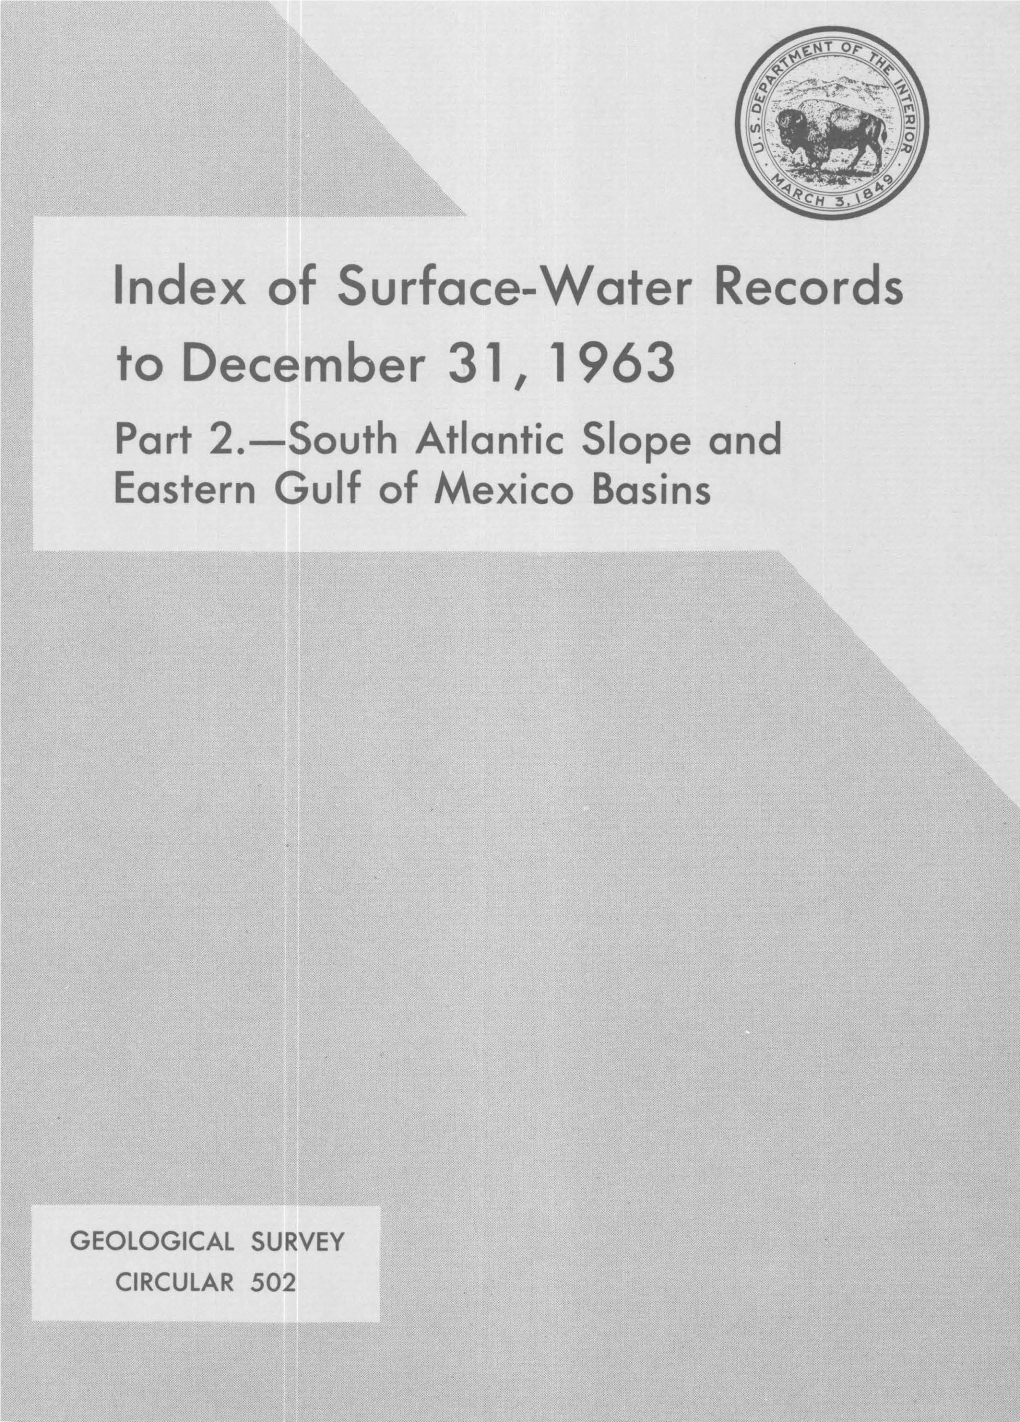 Index of Surface-Water Records to December 31, 1963 Part 2.-South Atlantic Slope and Eastern Gulf of Mexico Basins